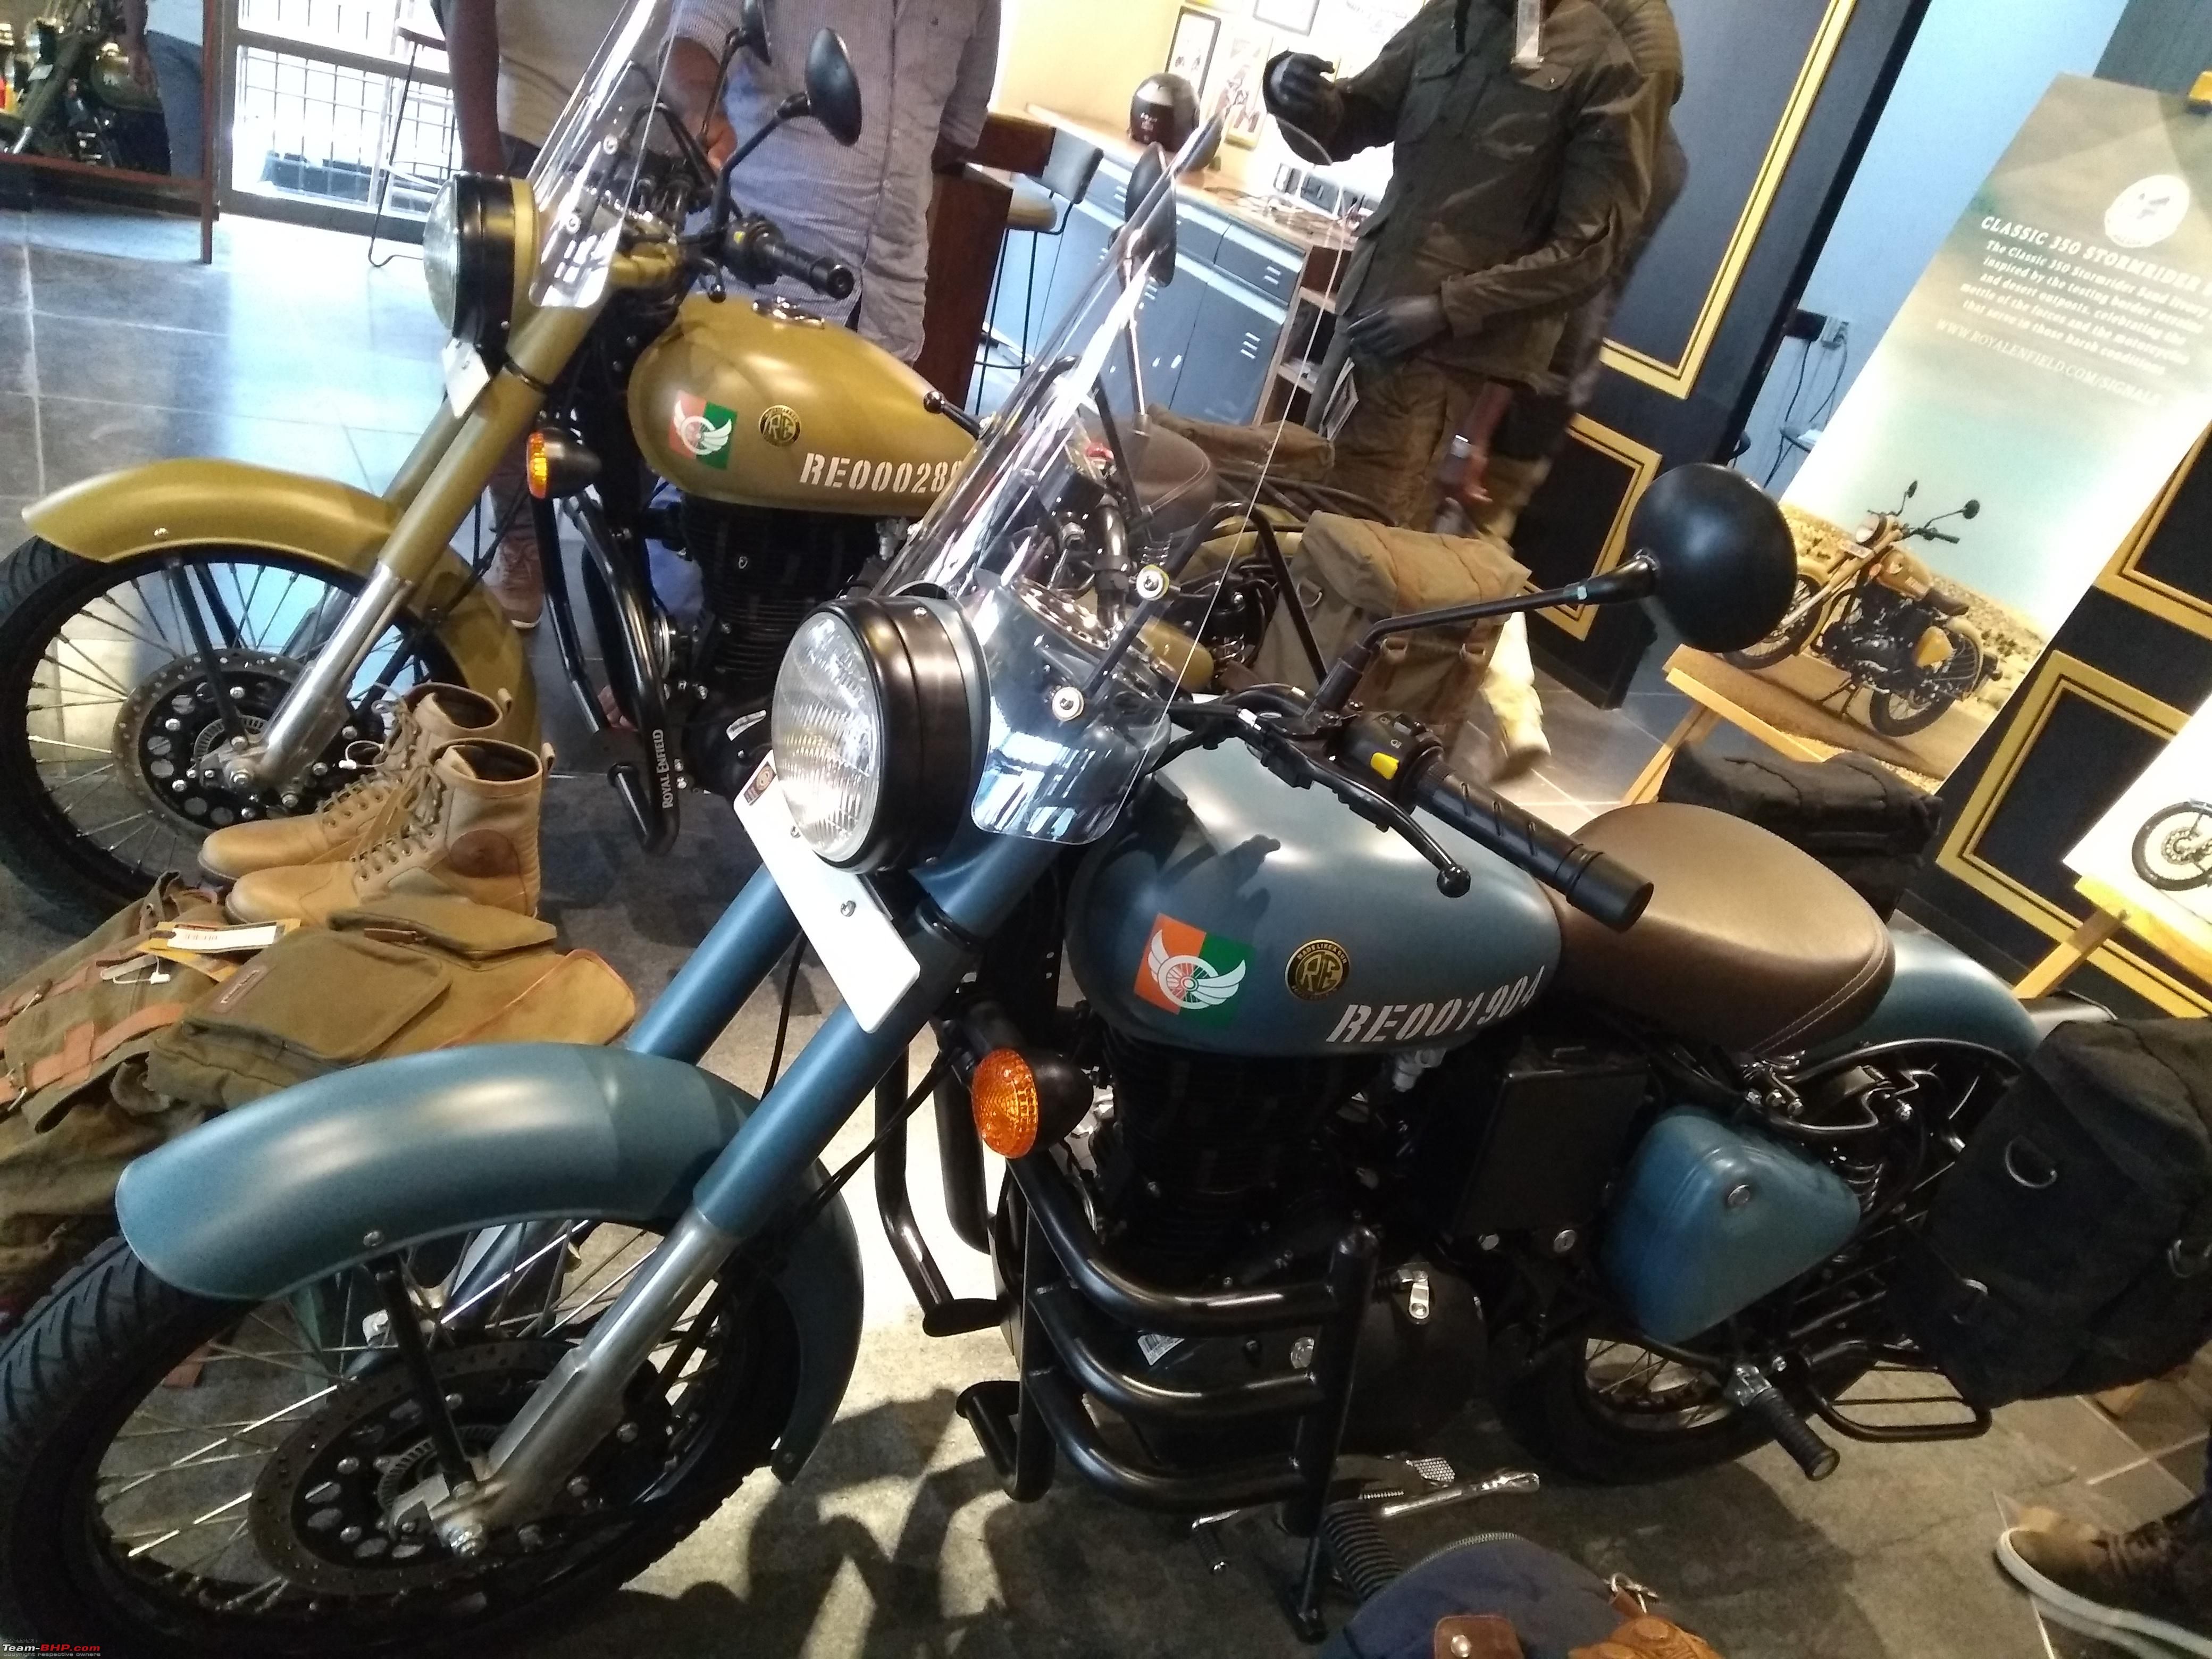 Royal Enfield Classic Signals 350 With 2 Channel ABS Launched At Rs